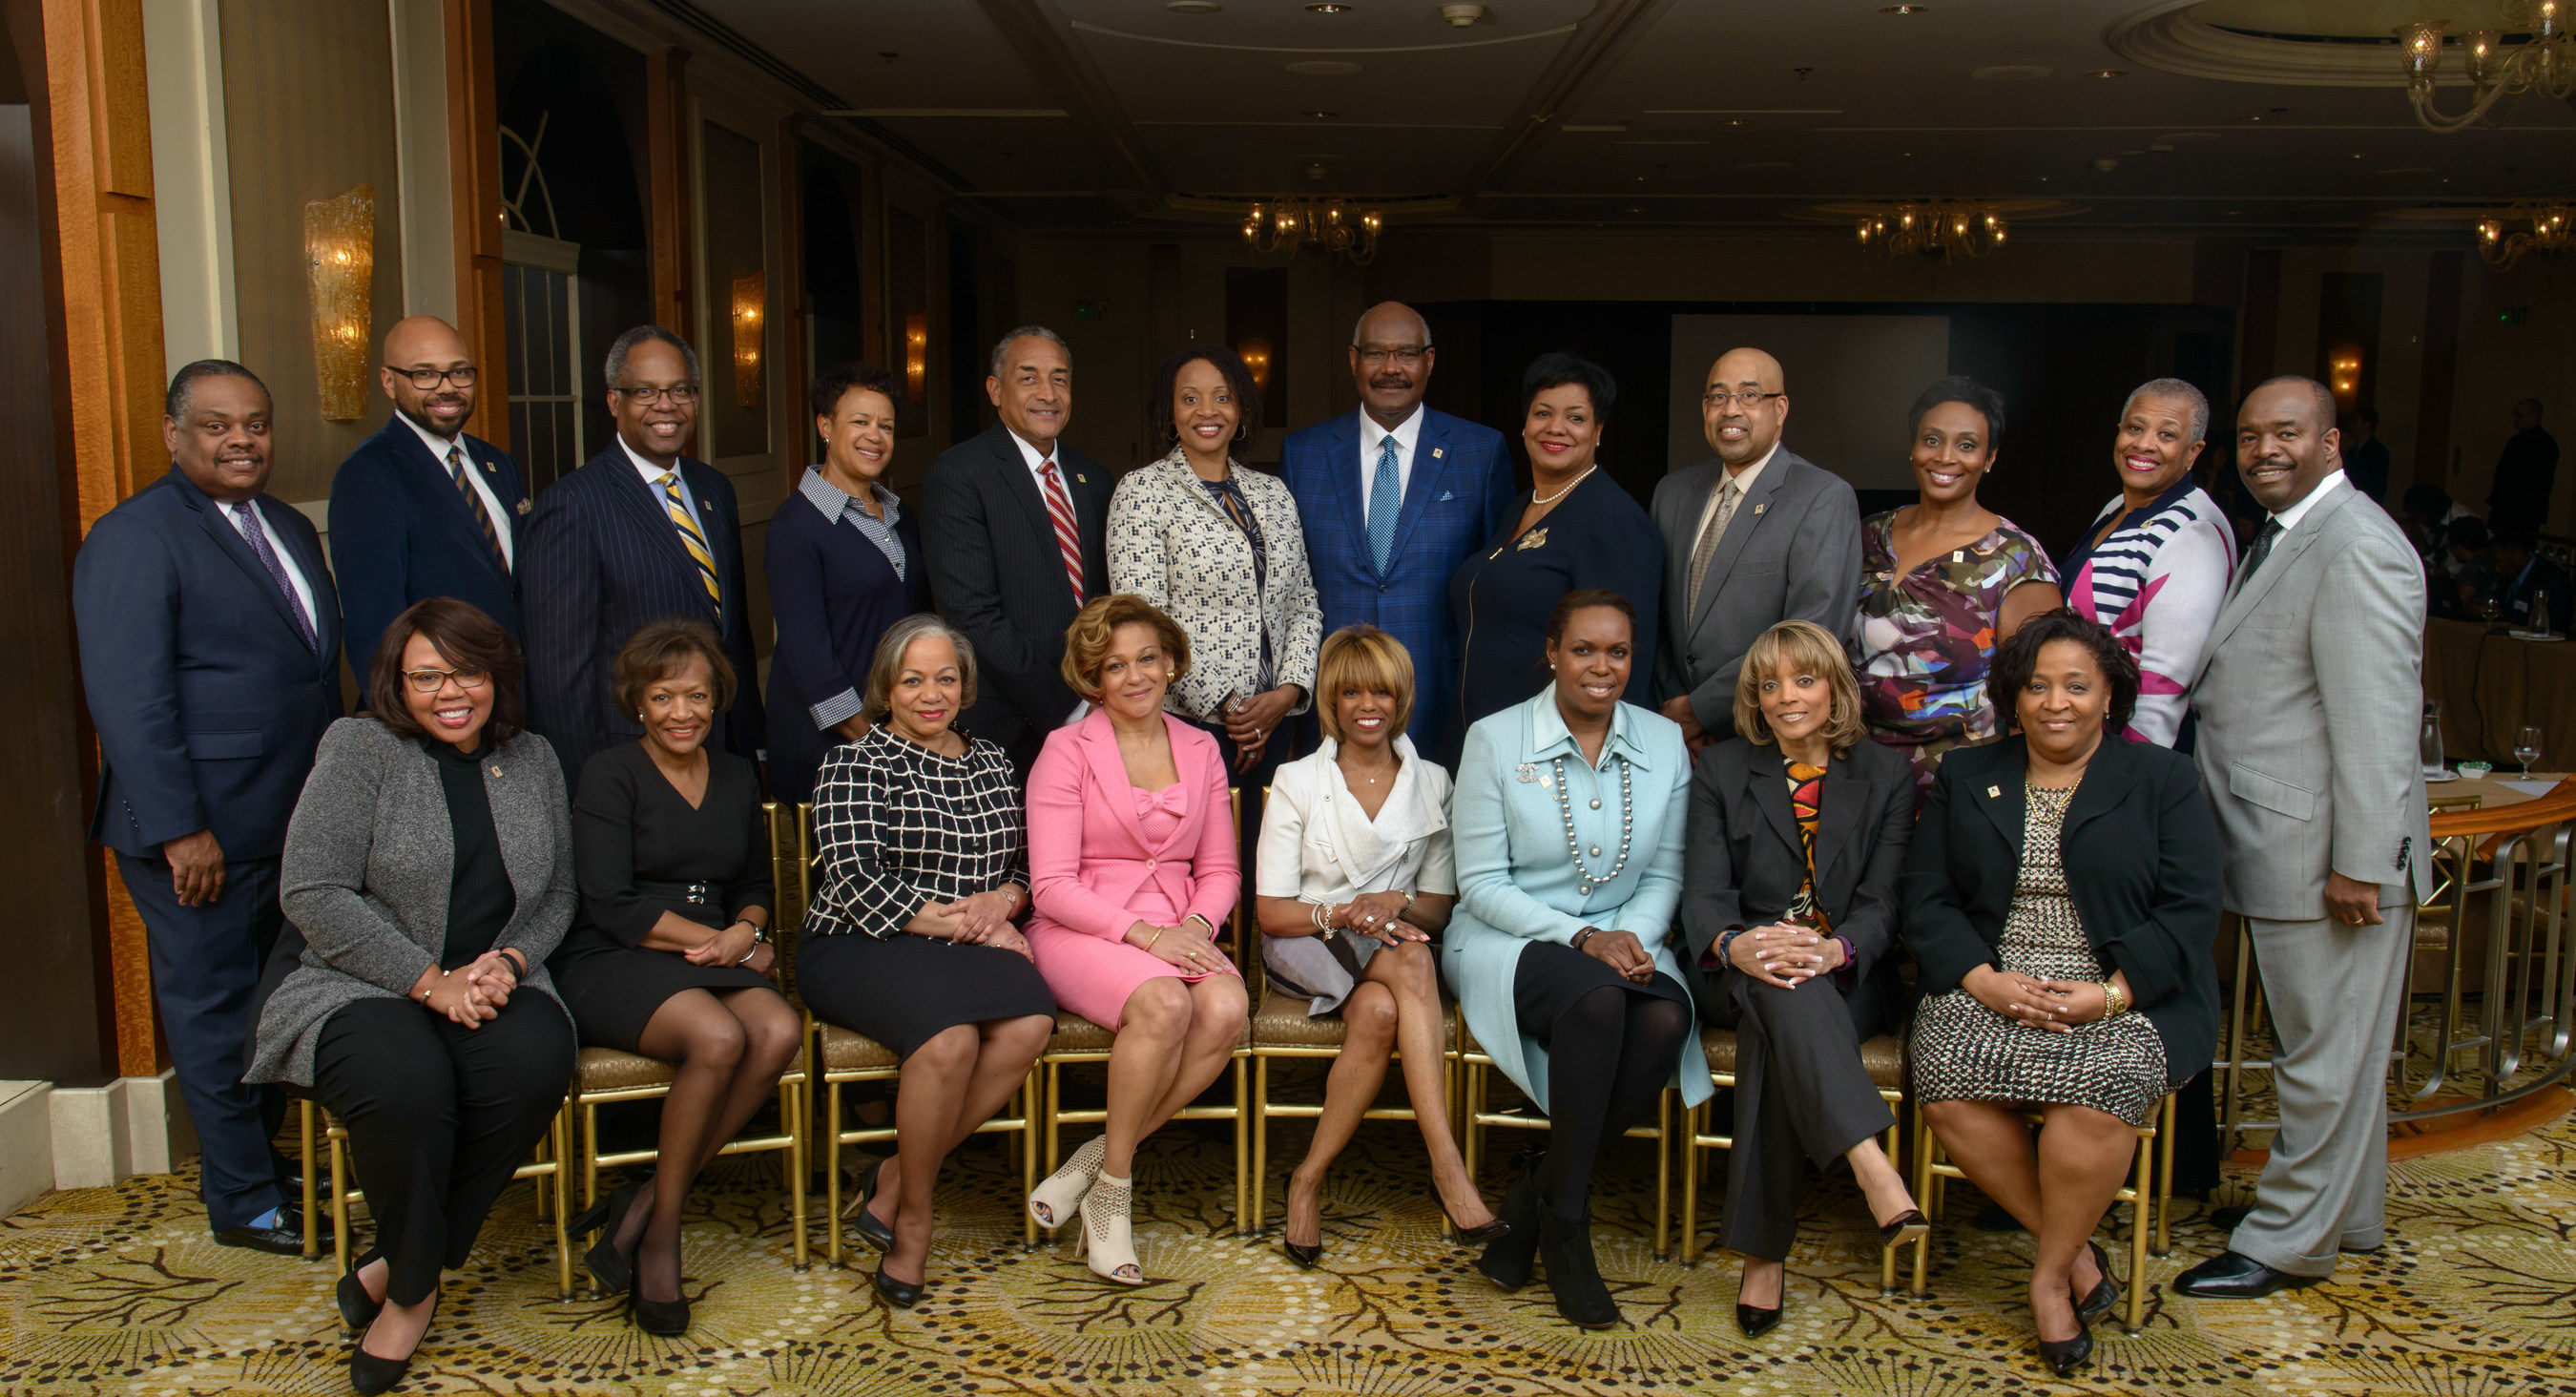 The Executive Leadership Council's (ELC) Board of Directors with Board Chair (bottom row - 3rd from right) Rhonda Mims, Managing Director, Corporate Social Responsibility, Paul Hasting, LLP.